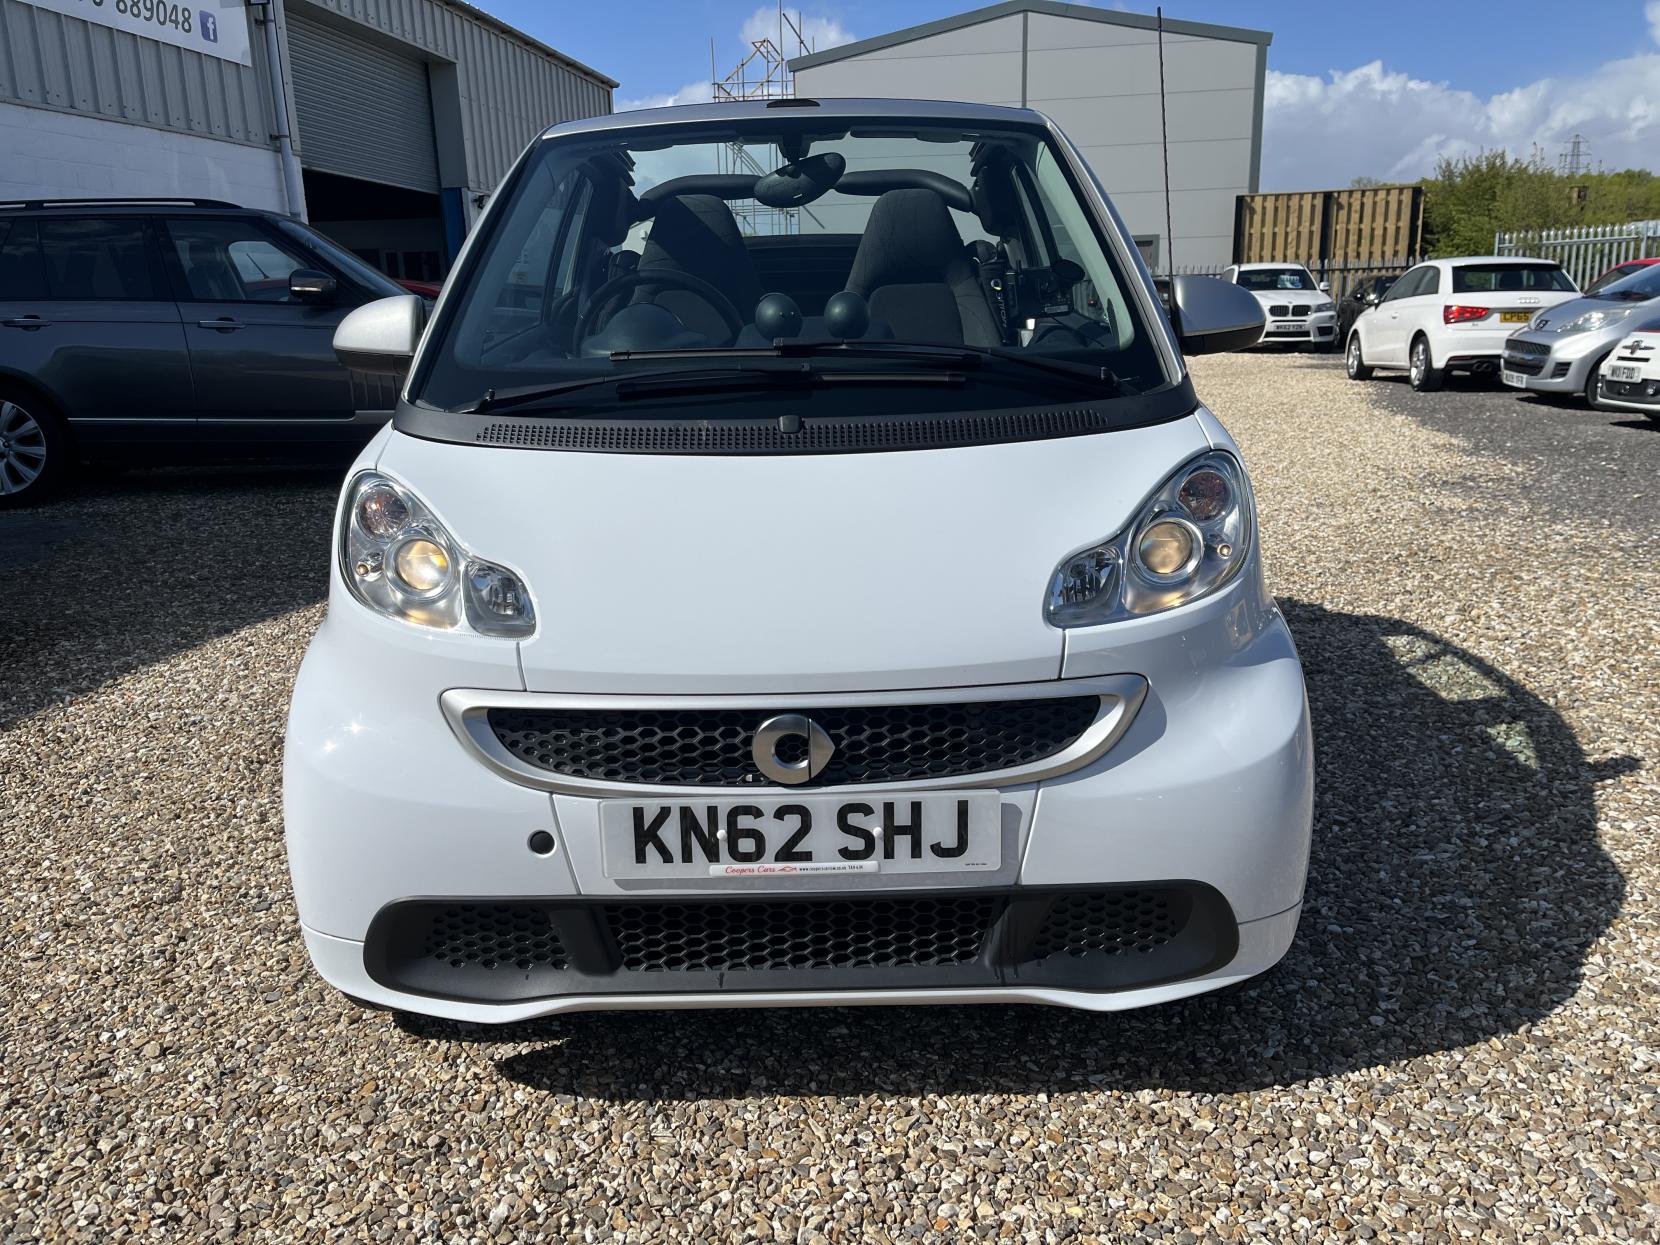 Smart fortwo 1.0 MHD Passion Cabriolet 2dr Petrol SoftTouch Euro 5 (s/s) (71 bhp)